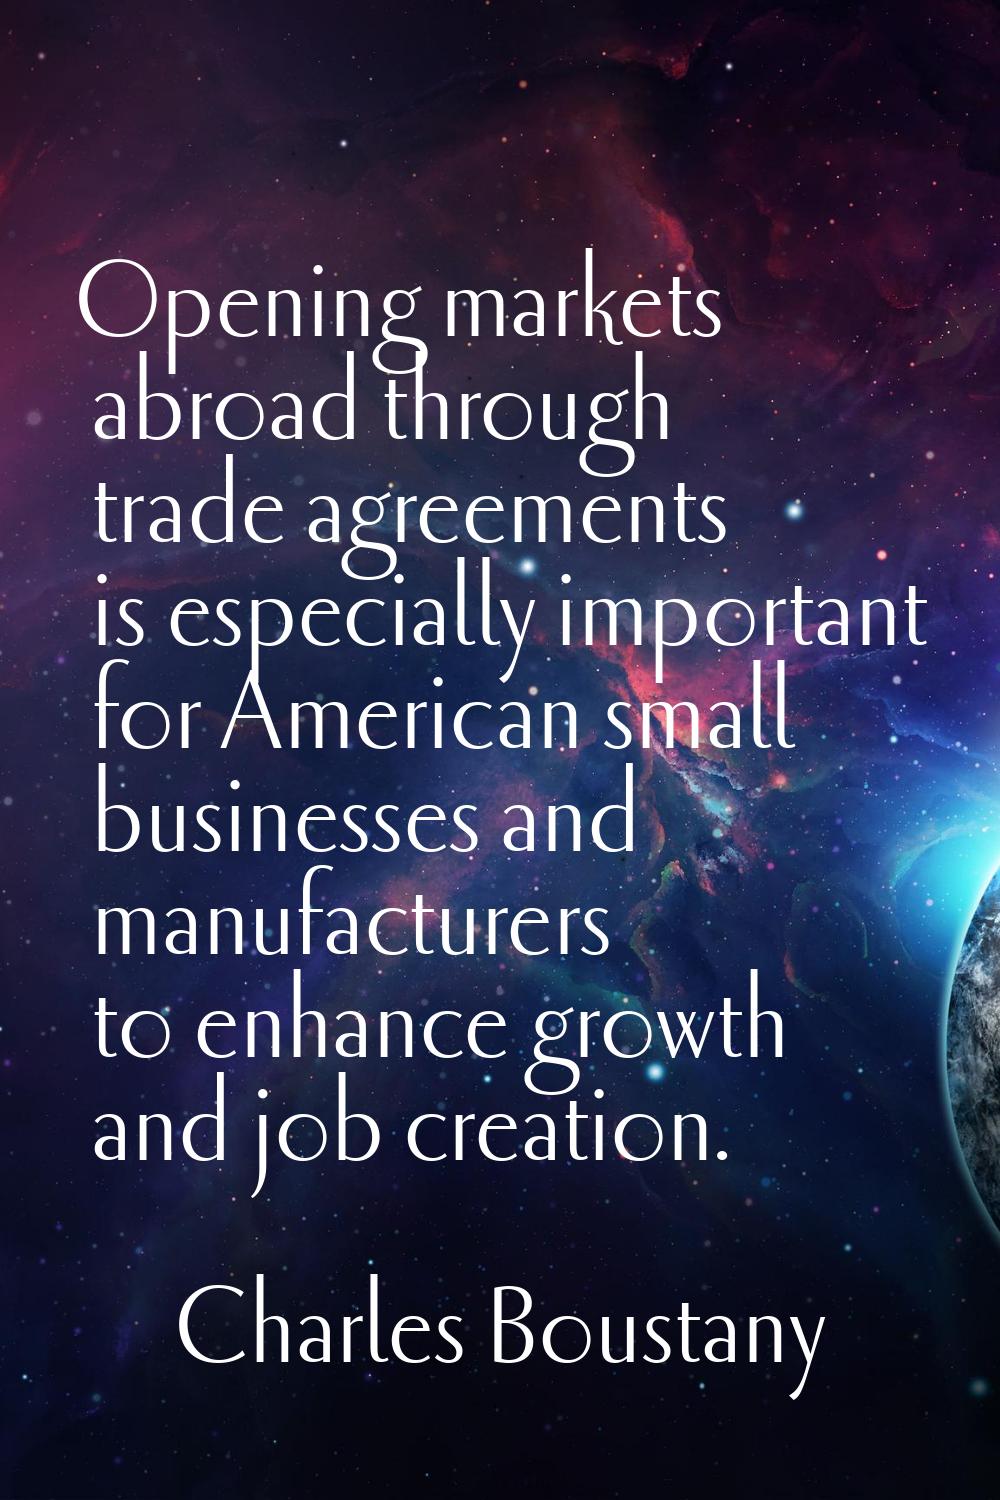 Opening markets abroad through trade agreements is especially important for American small business